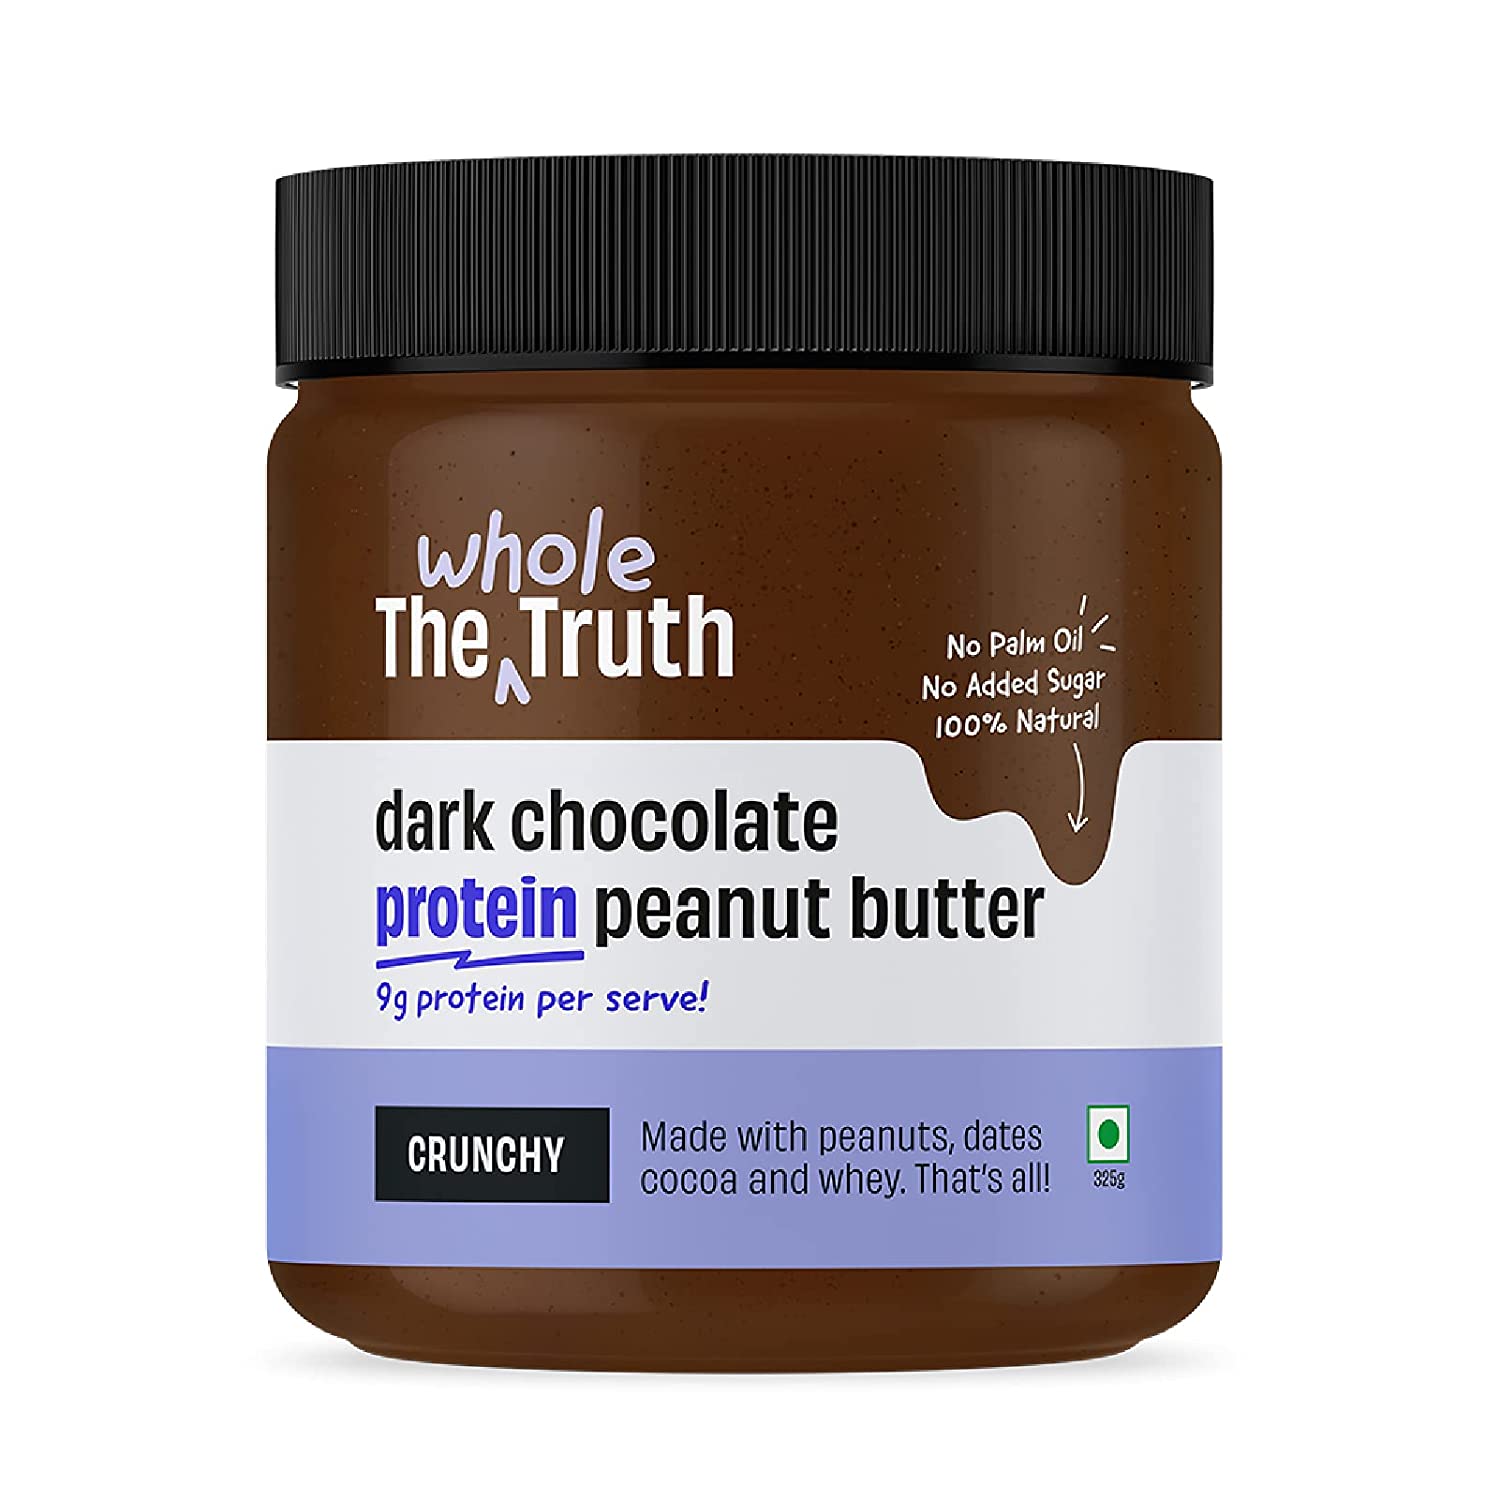 The Whole Truth Dark Chocolate Protein Peanut Butter Crunchy Image